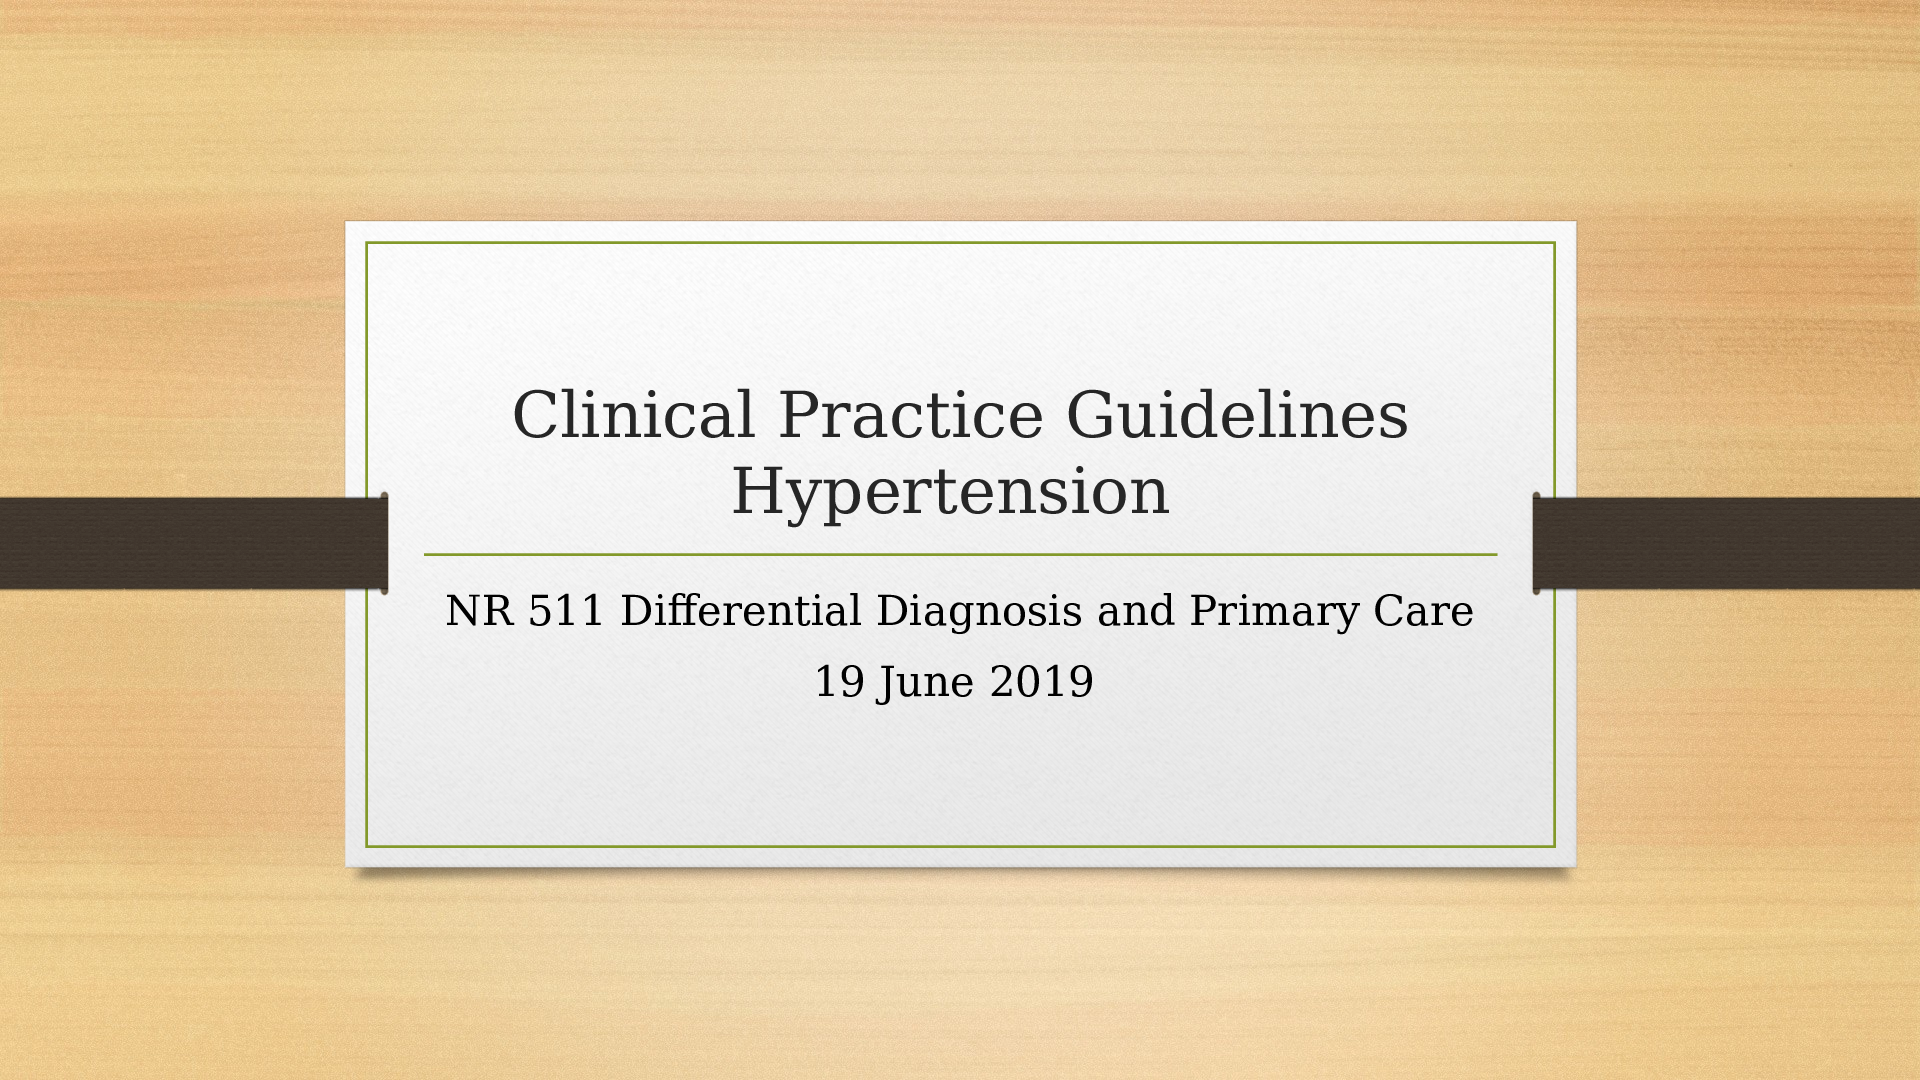 Clinical Practice Guidelines Hypertension NR 511 Differential Diagnosis and Primary Care 19 June 2019